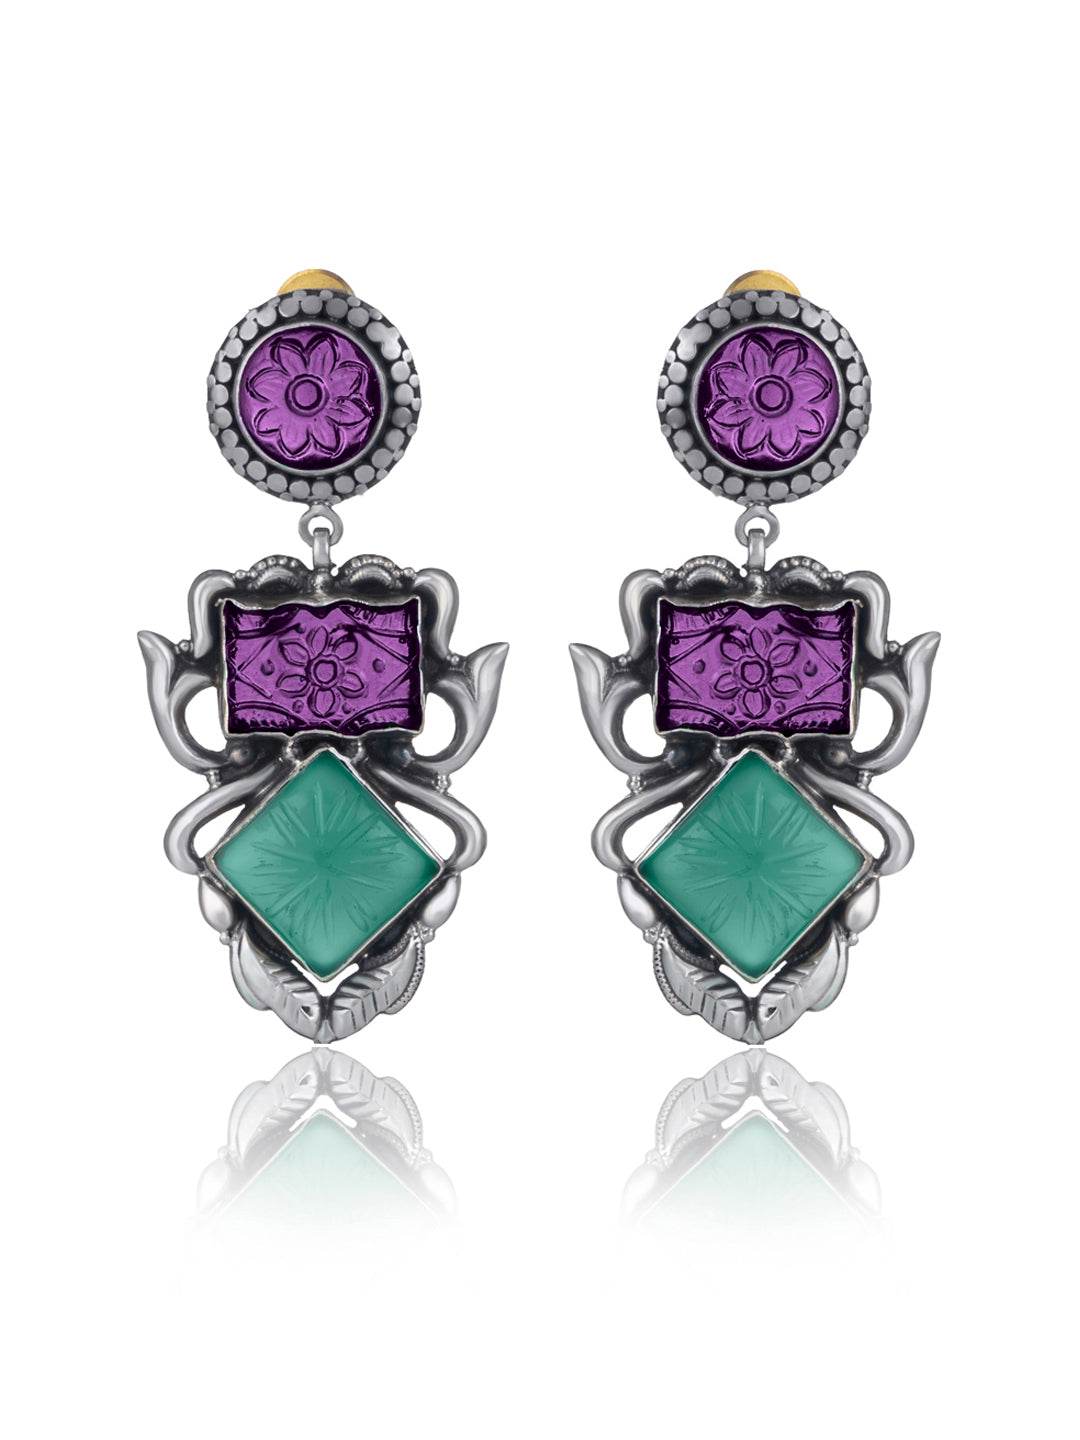 Colored Carved Glass Statement Earrings